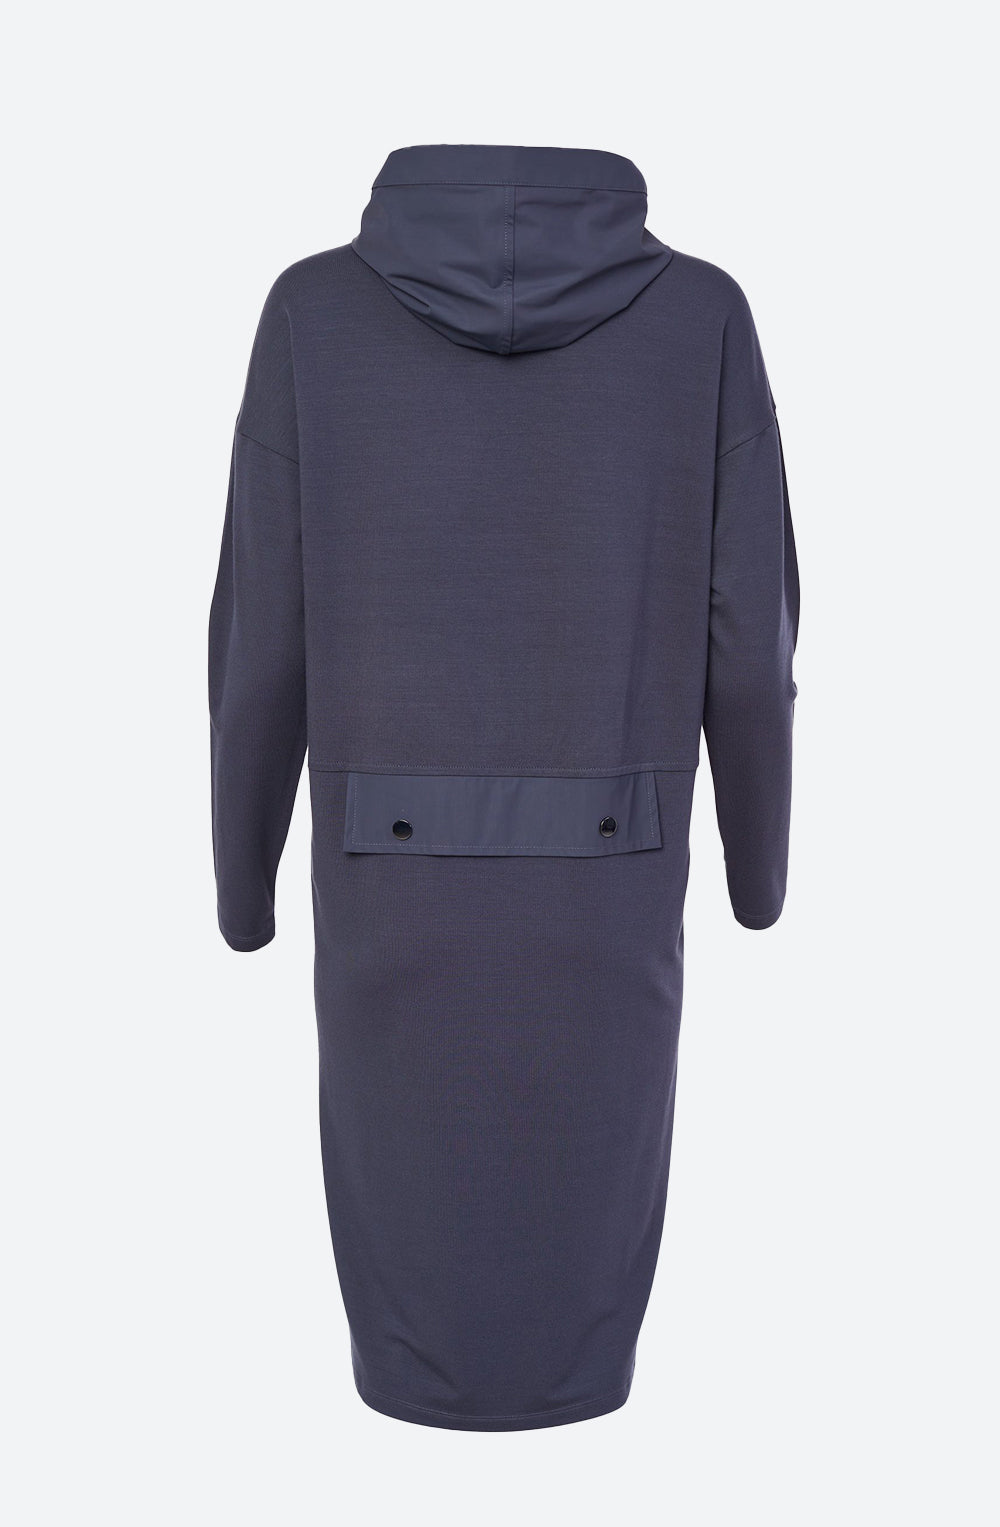 Shift Dress with Hood in Anthracite